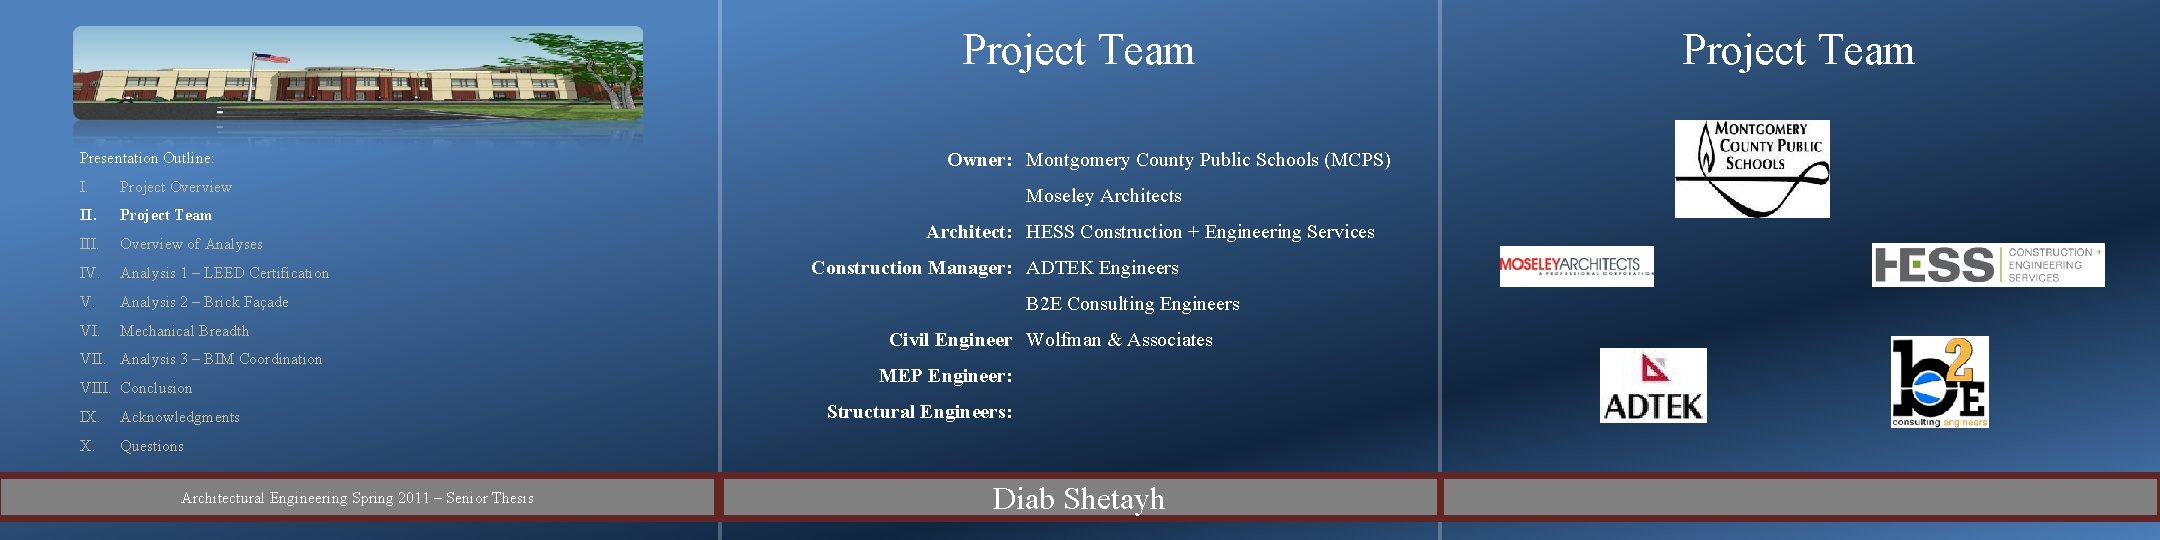 Project Team Presentation Outline: I. Project Overview II. Project Team III. Overview of Analyses